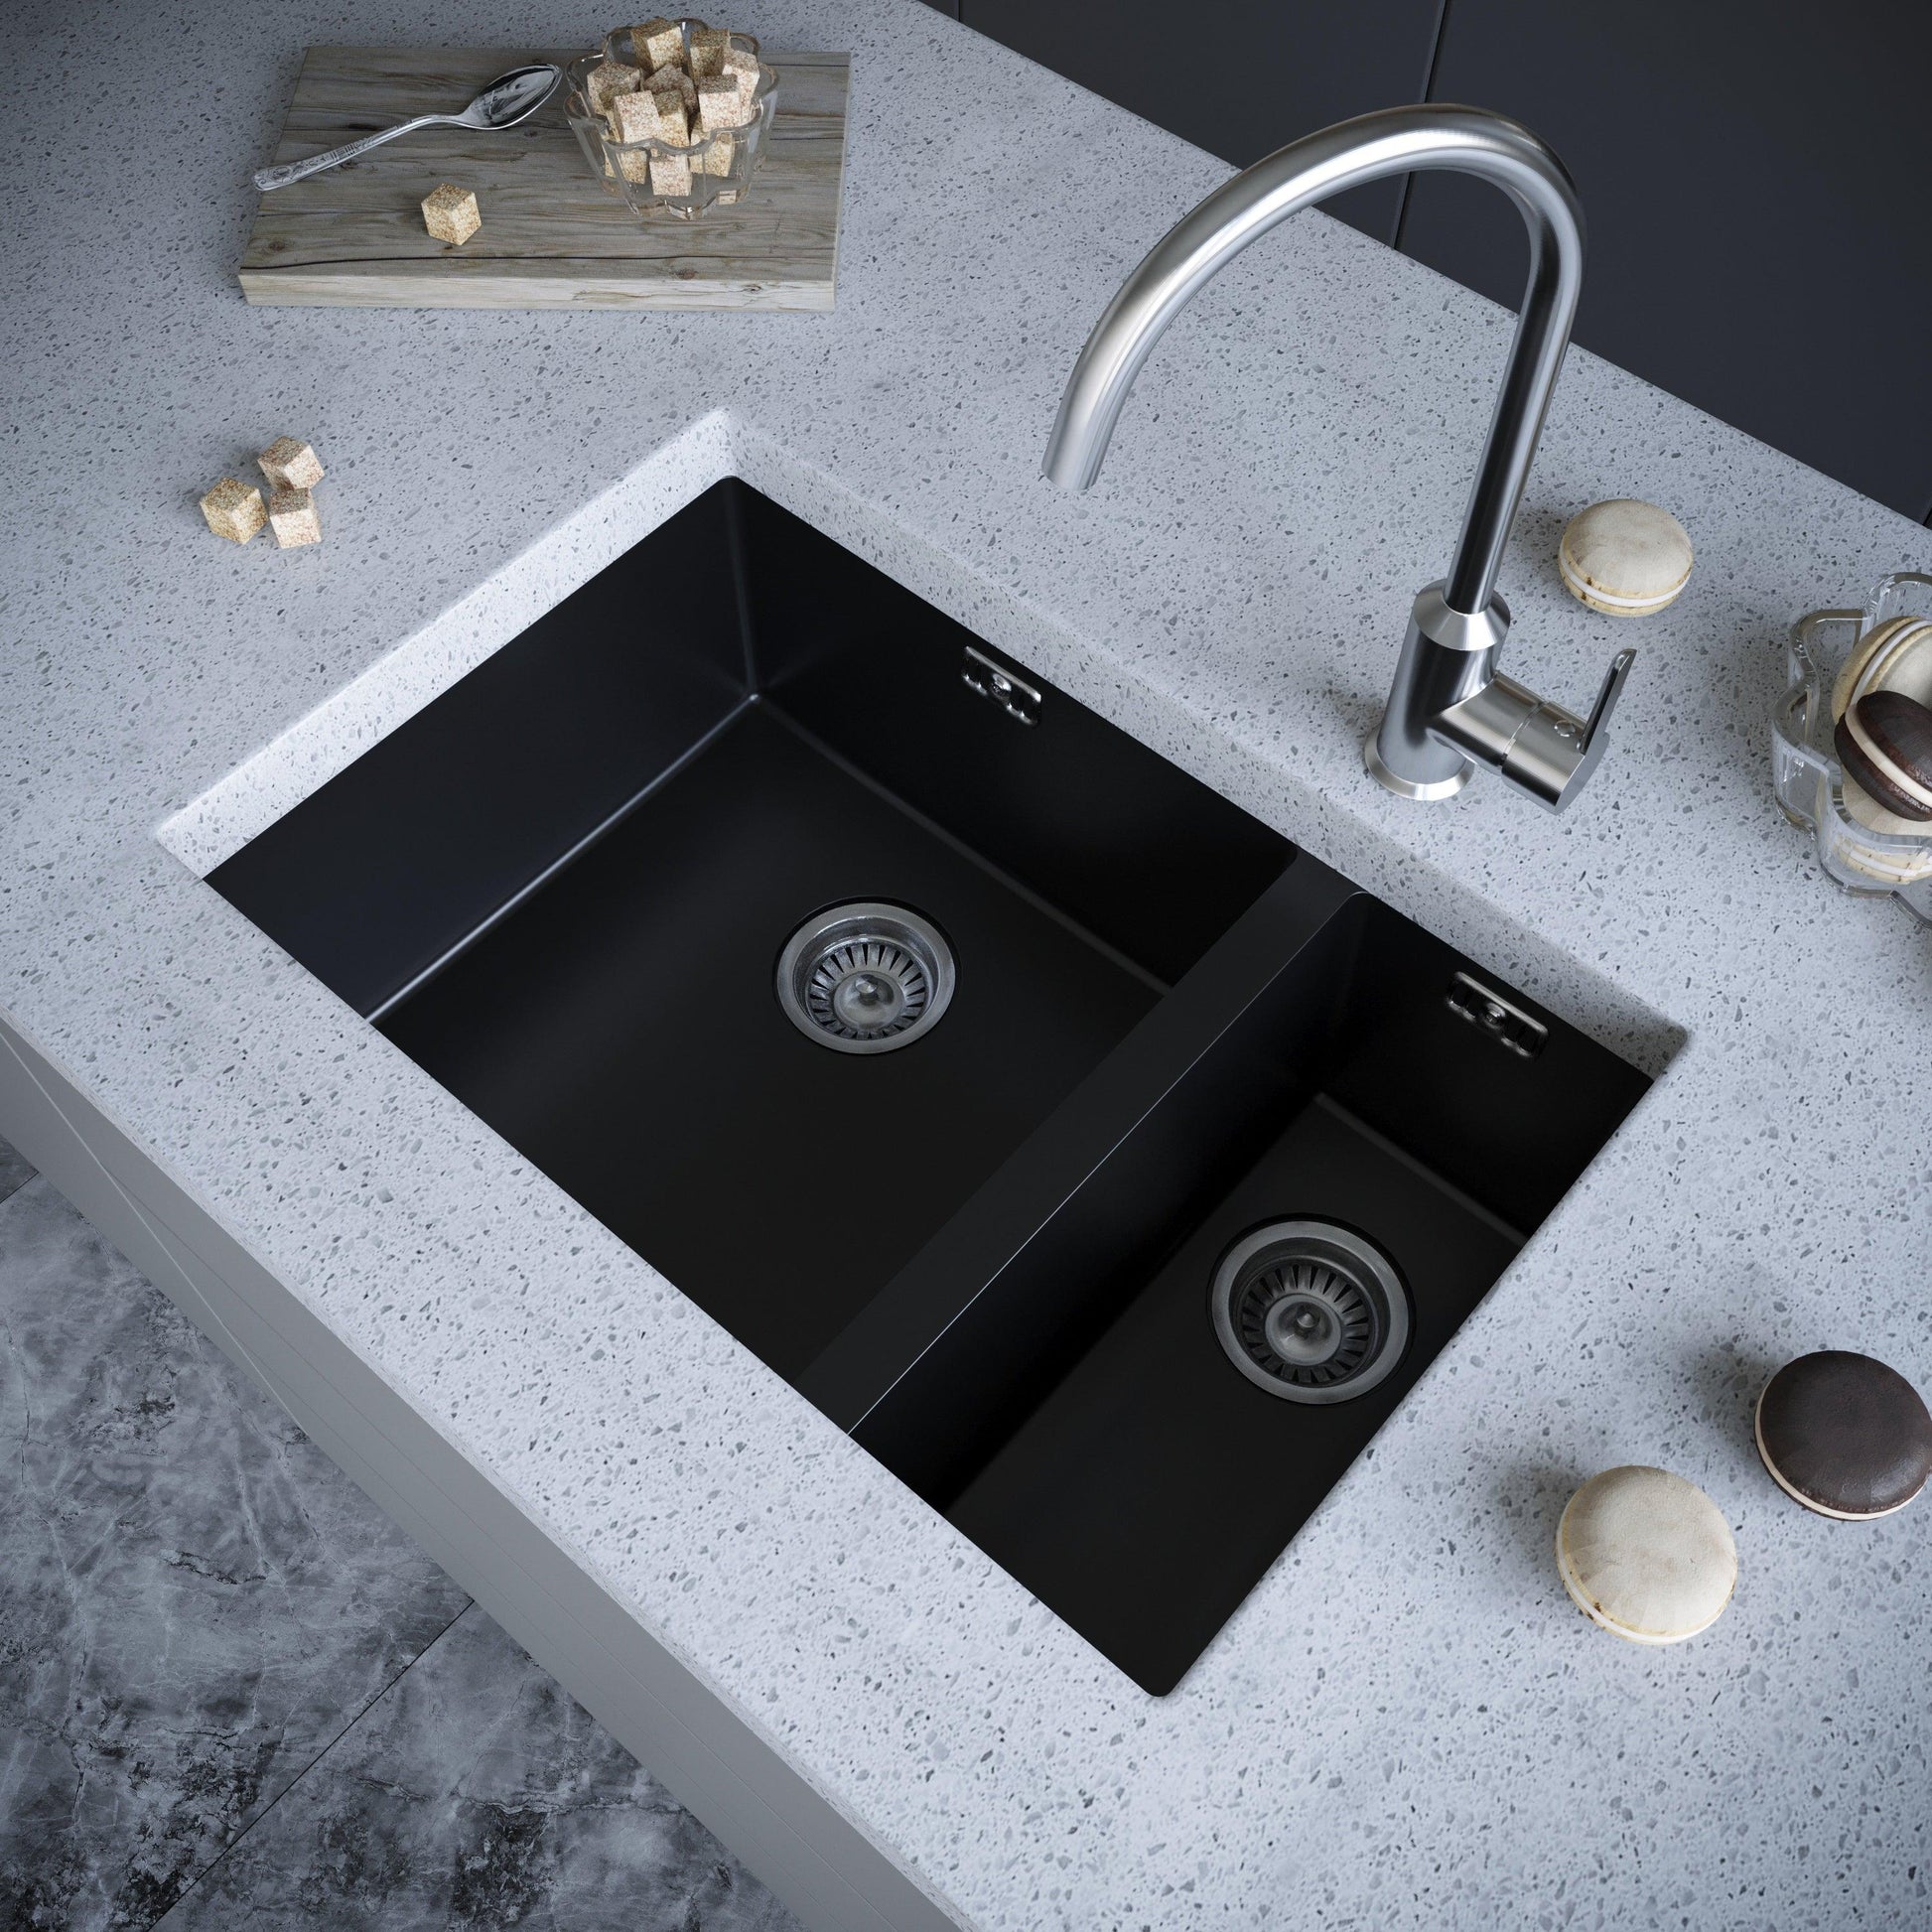 Ellsi Comite 1.5 Bowl Kitchen Sink with Wastes and Overflows - The Tap Specialist